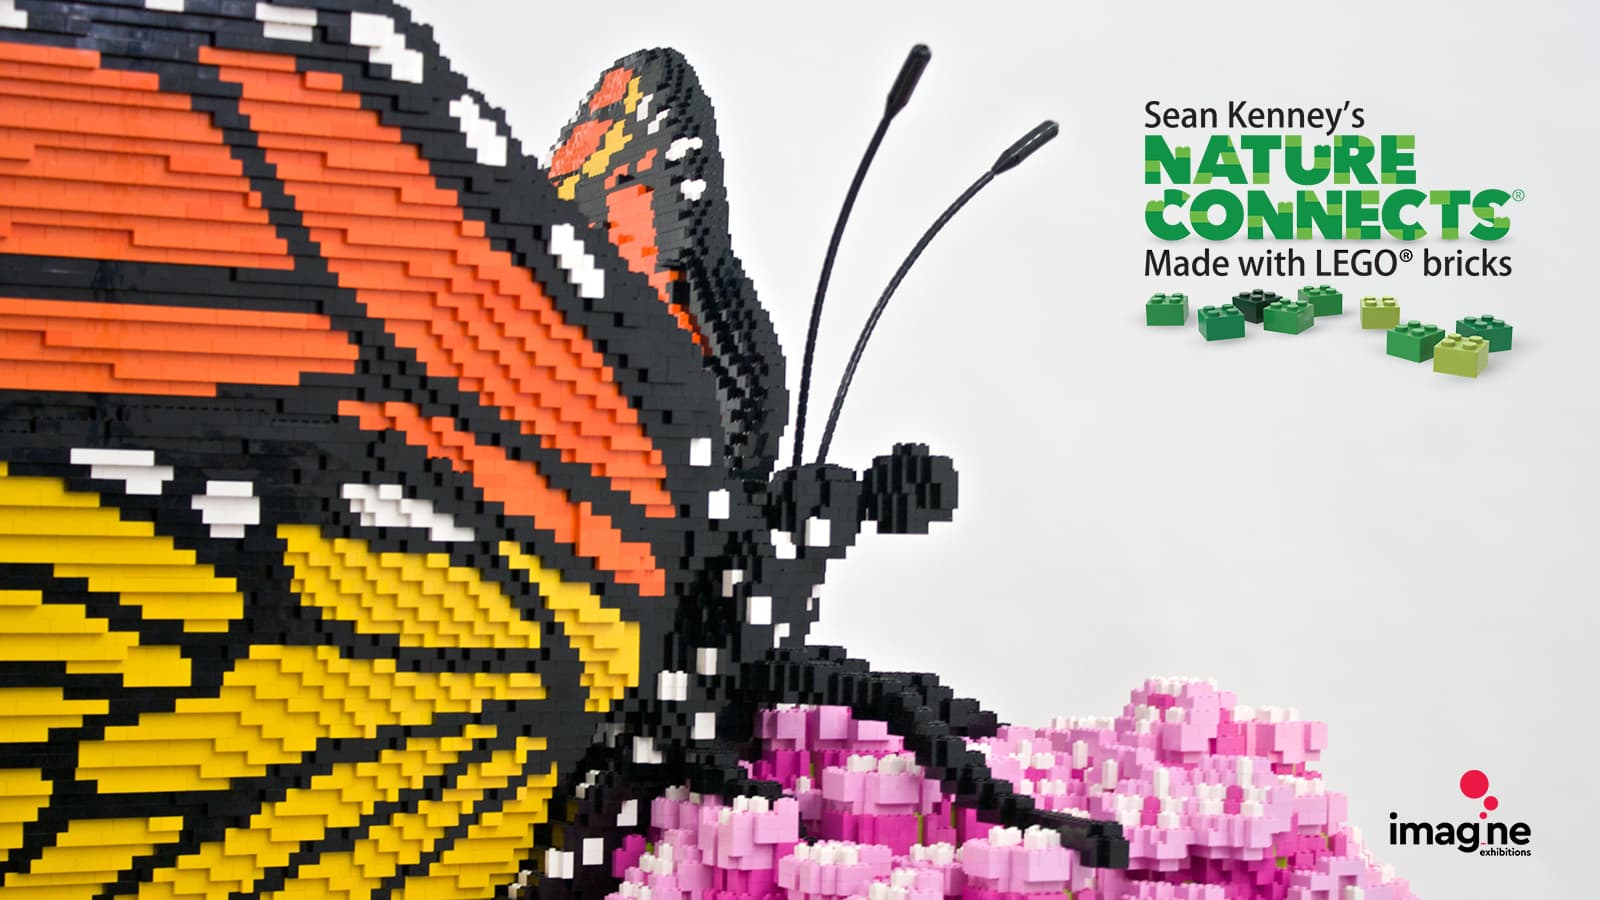 Sean Kenney's Nature Connects® Made with LEGO® Bricks